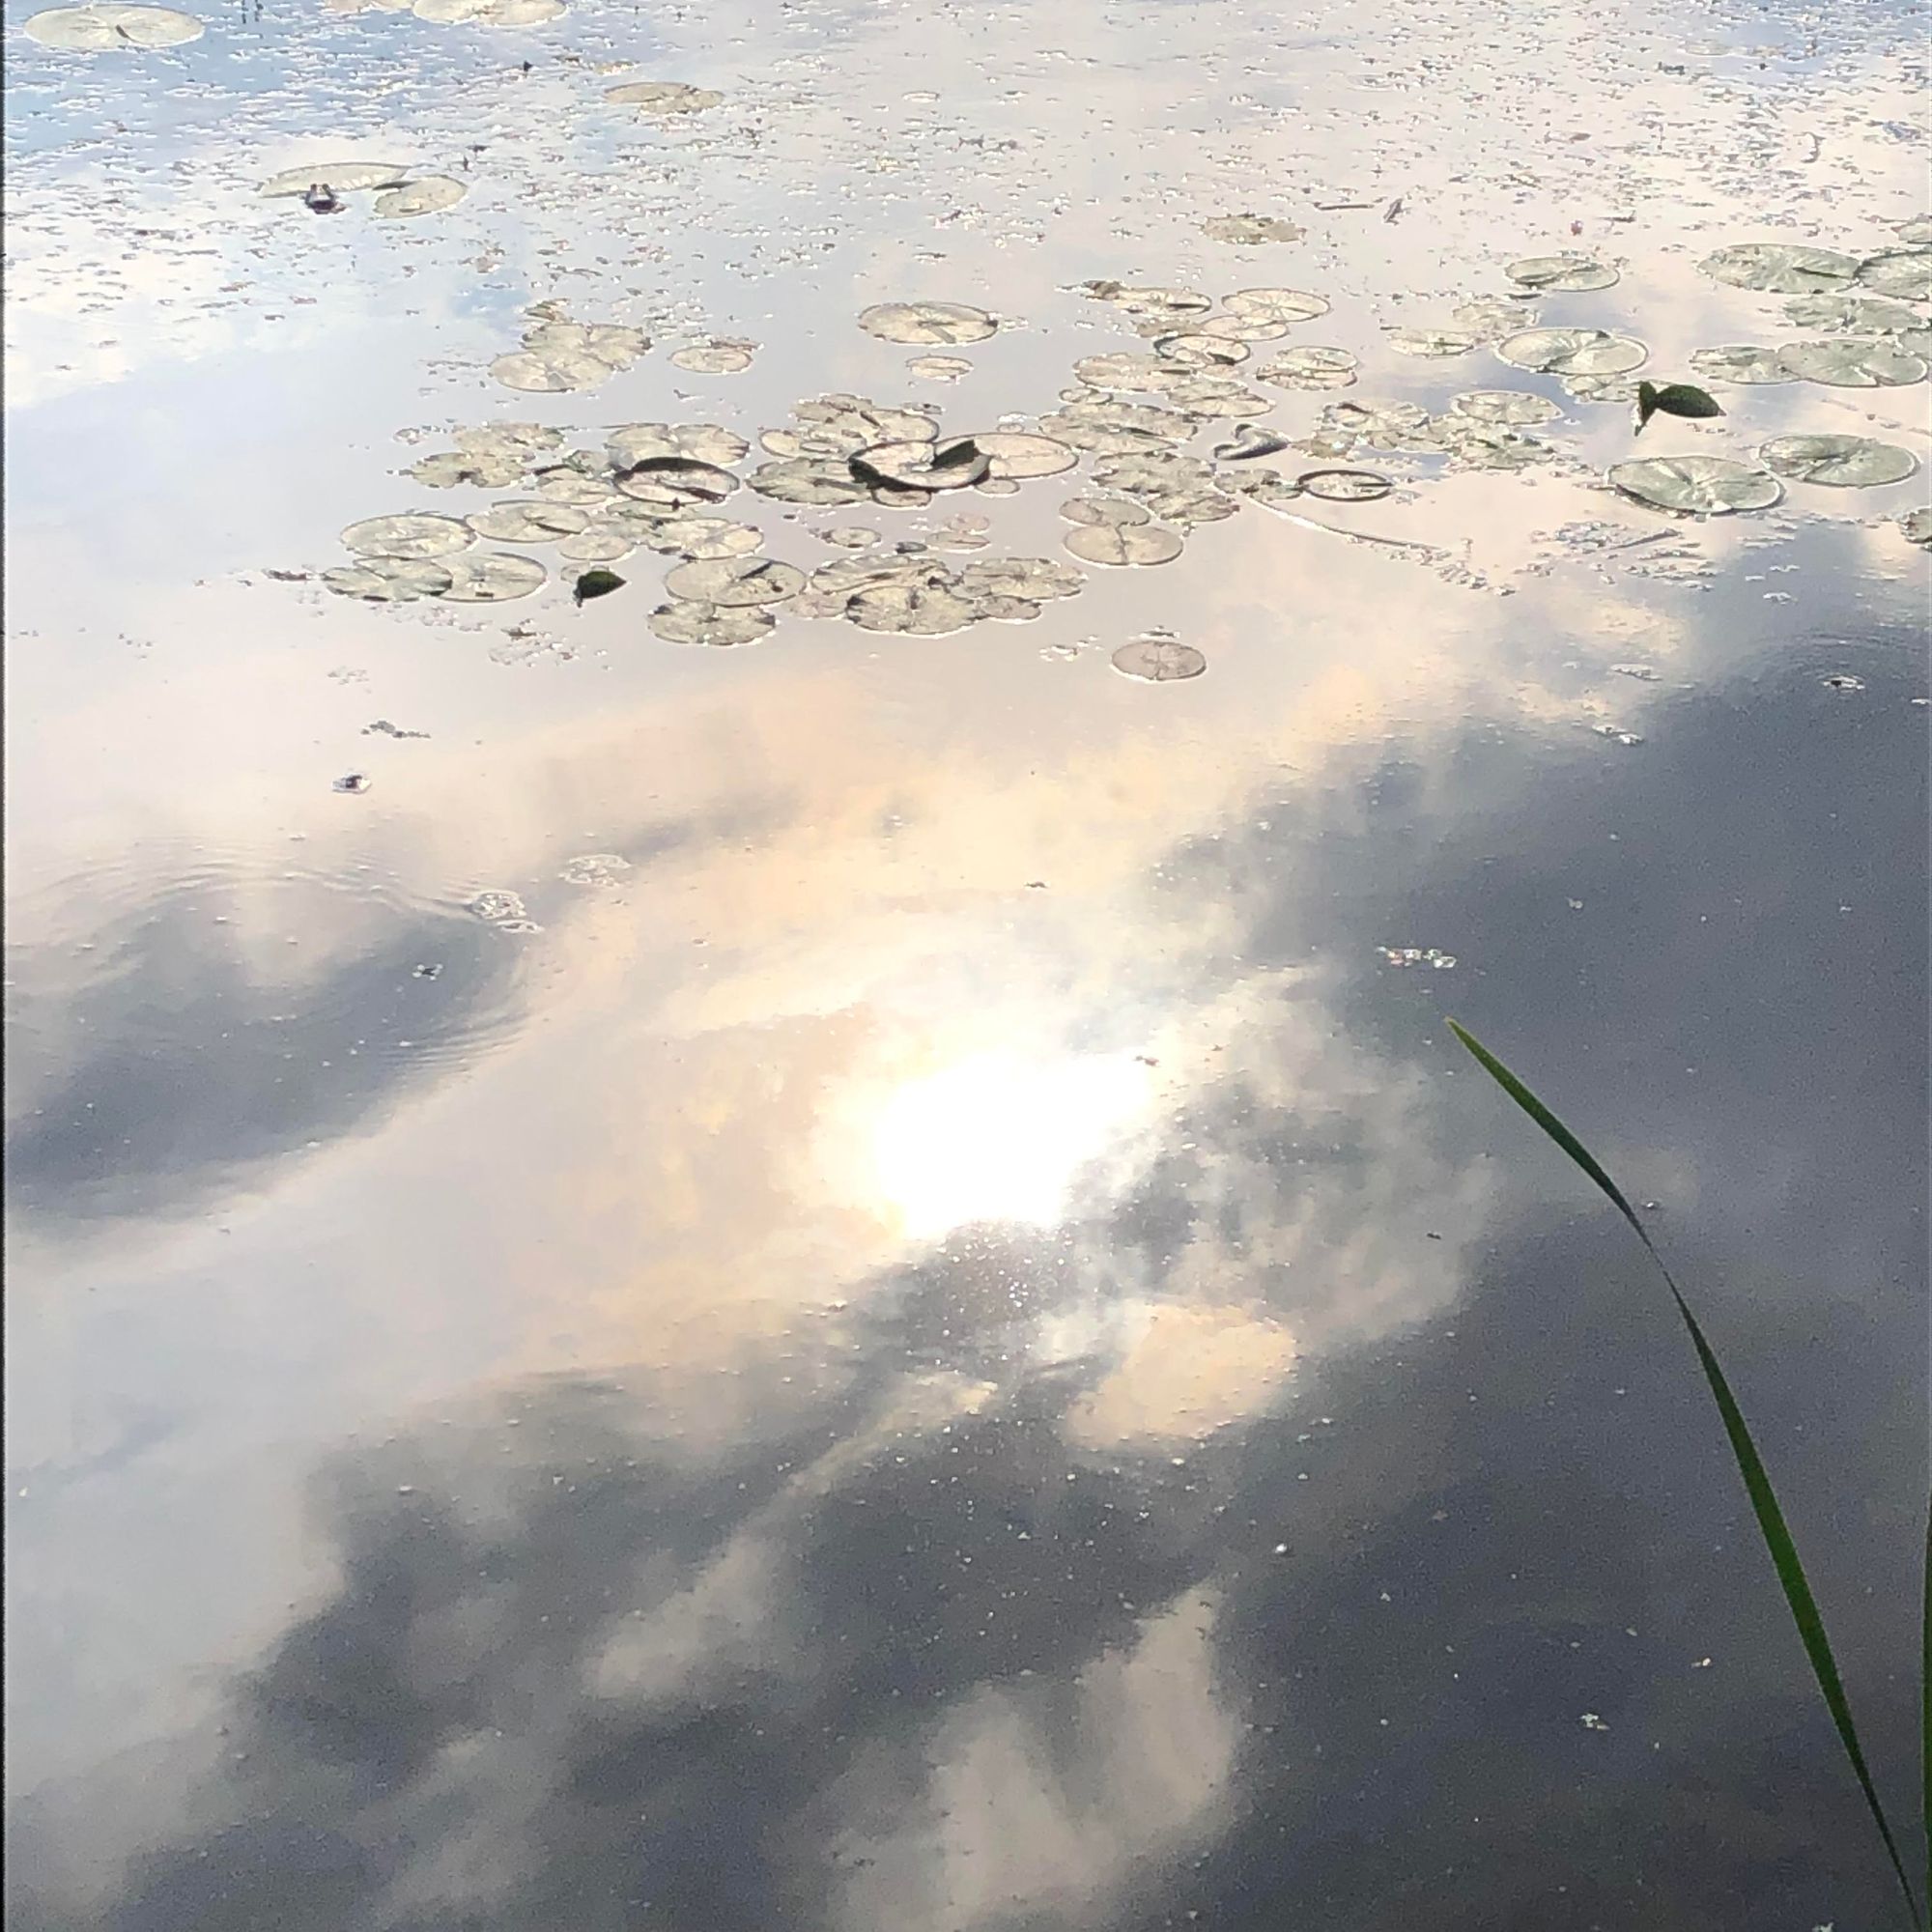 A photo of still river water reflecting sun and clouds; in the top third are lily pads, and to the bottom right is a single stem of long grass, bending towards the lily pads as if pointing.